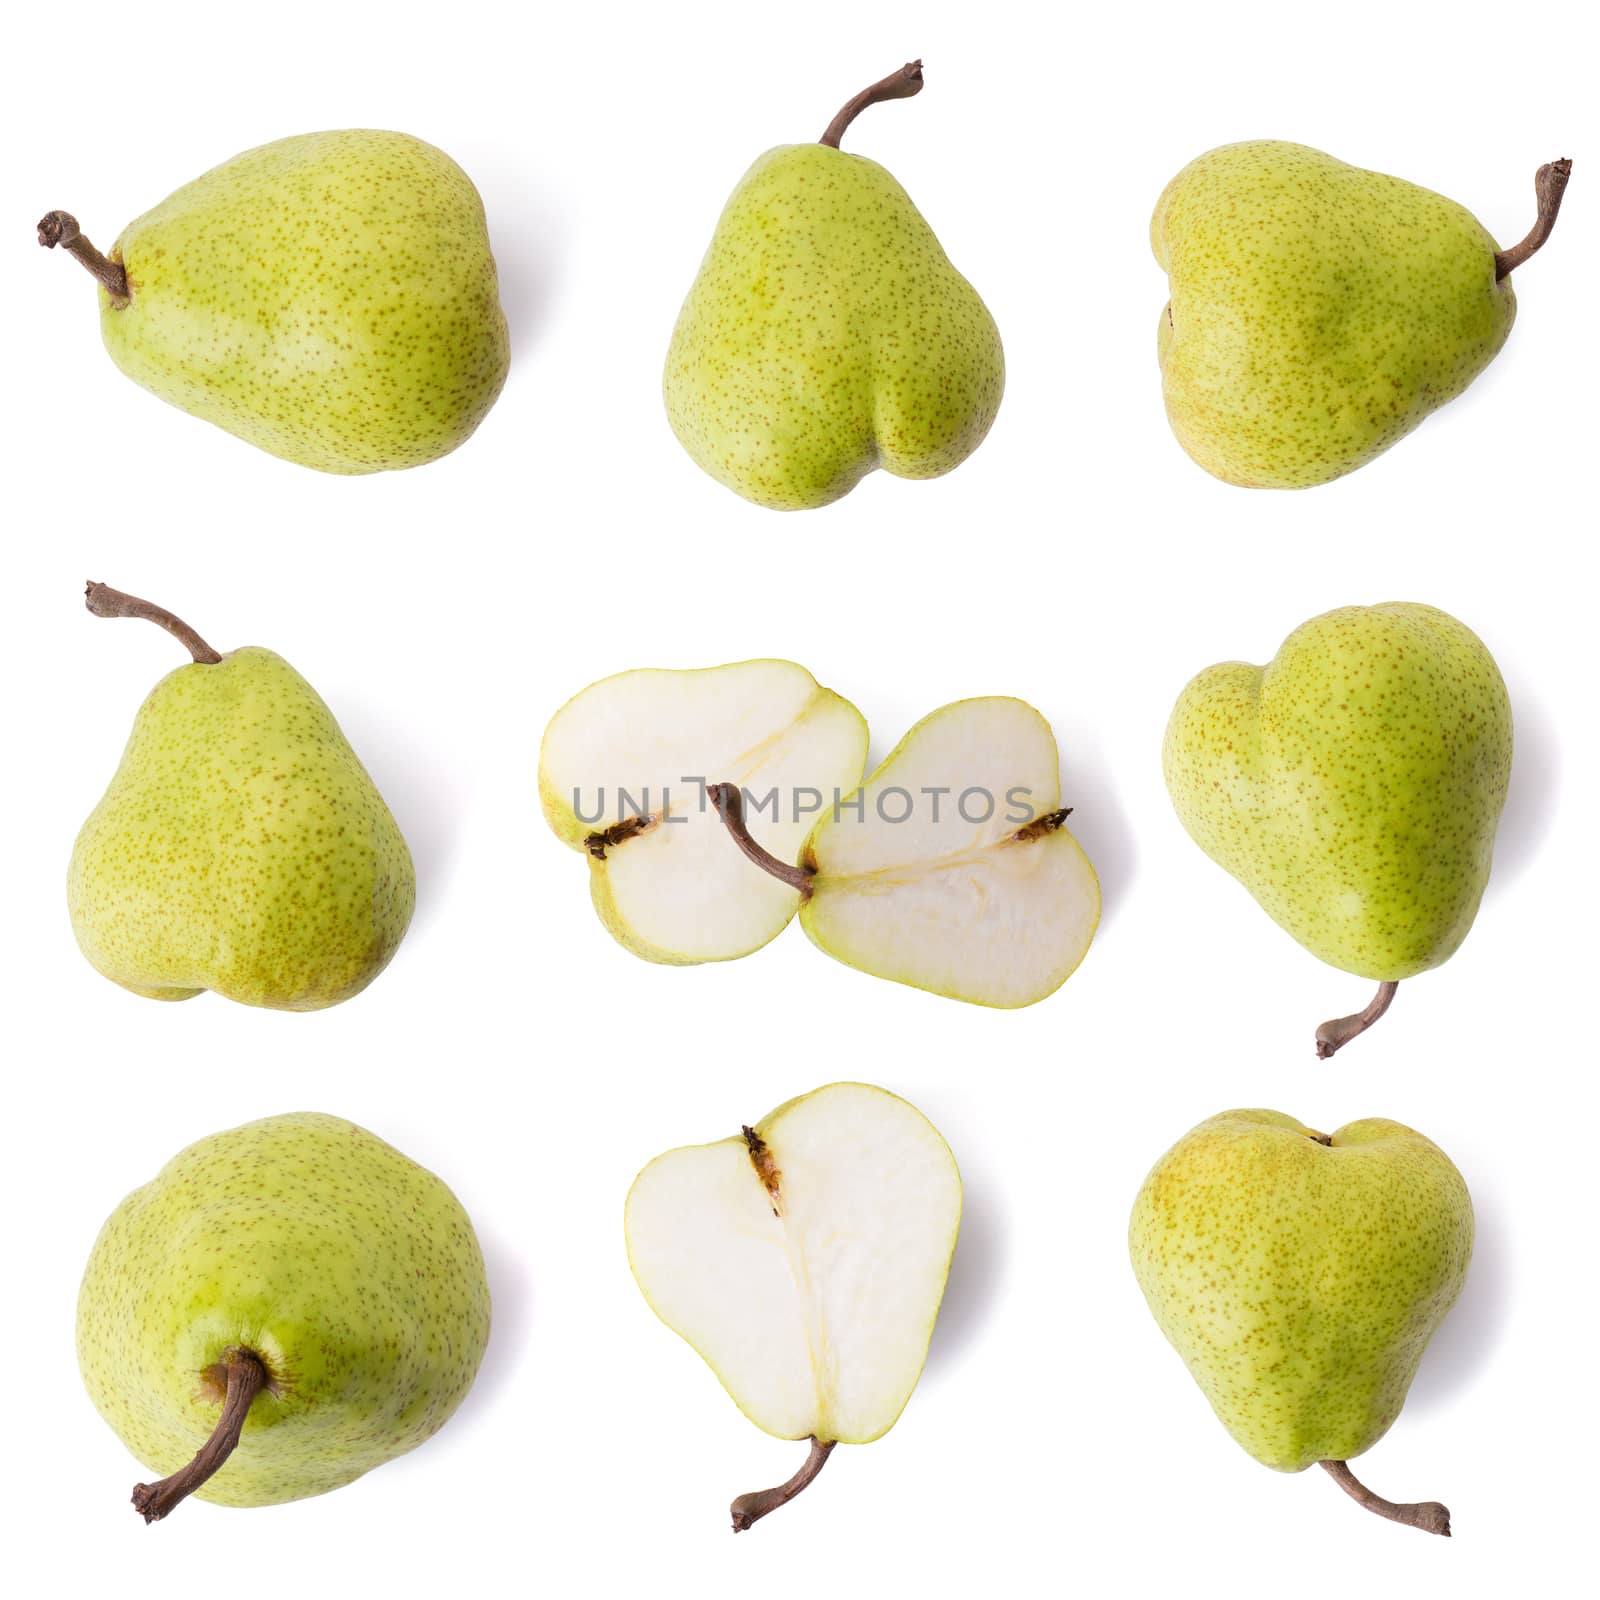 Pear with a cut isolated on white background.